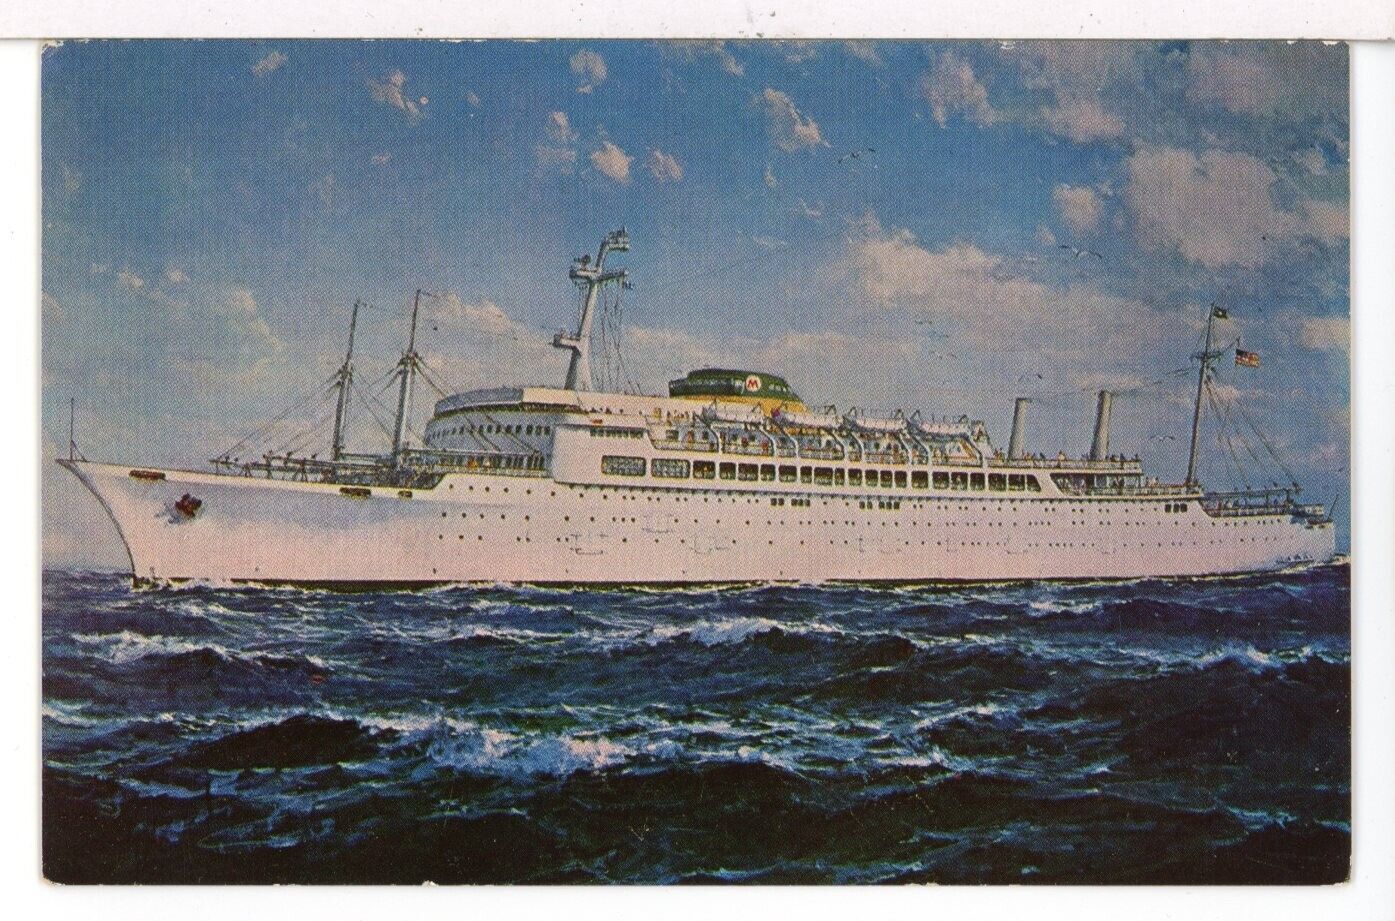 SS ARGENTINE SS BRASIL Moore-McCormack Line, NYC to So. America 1950s Postcard